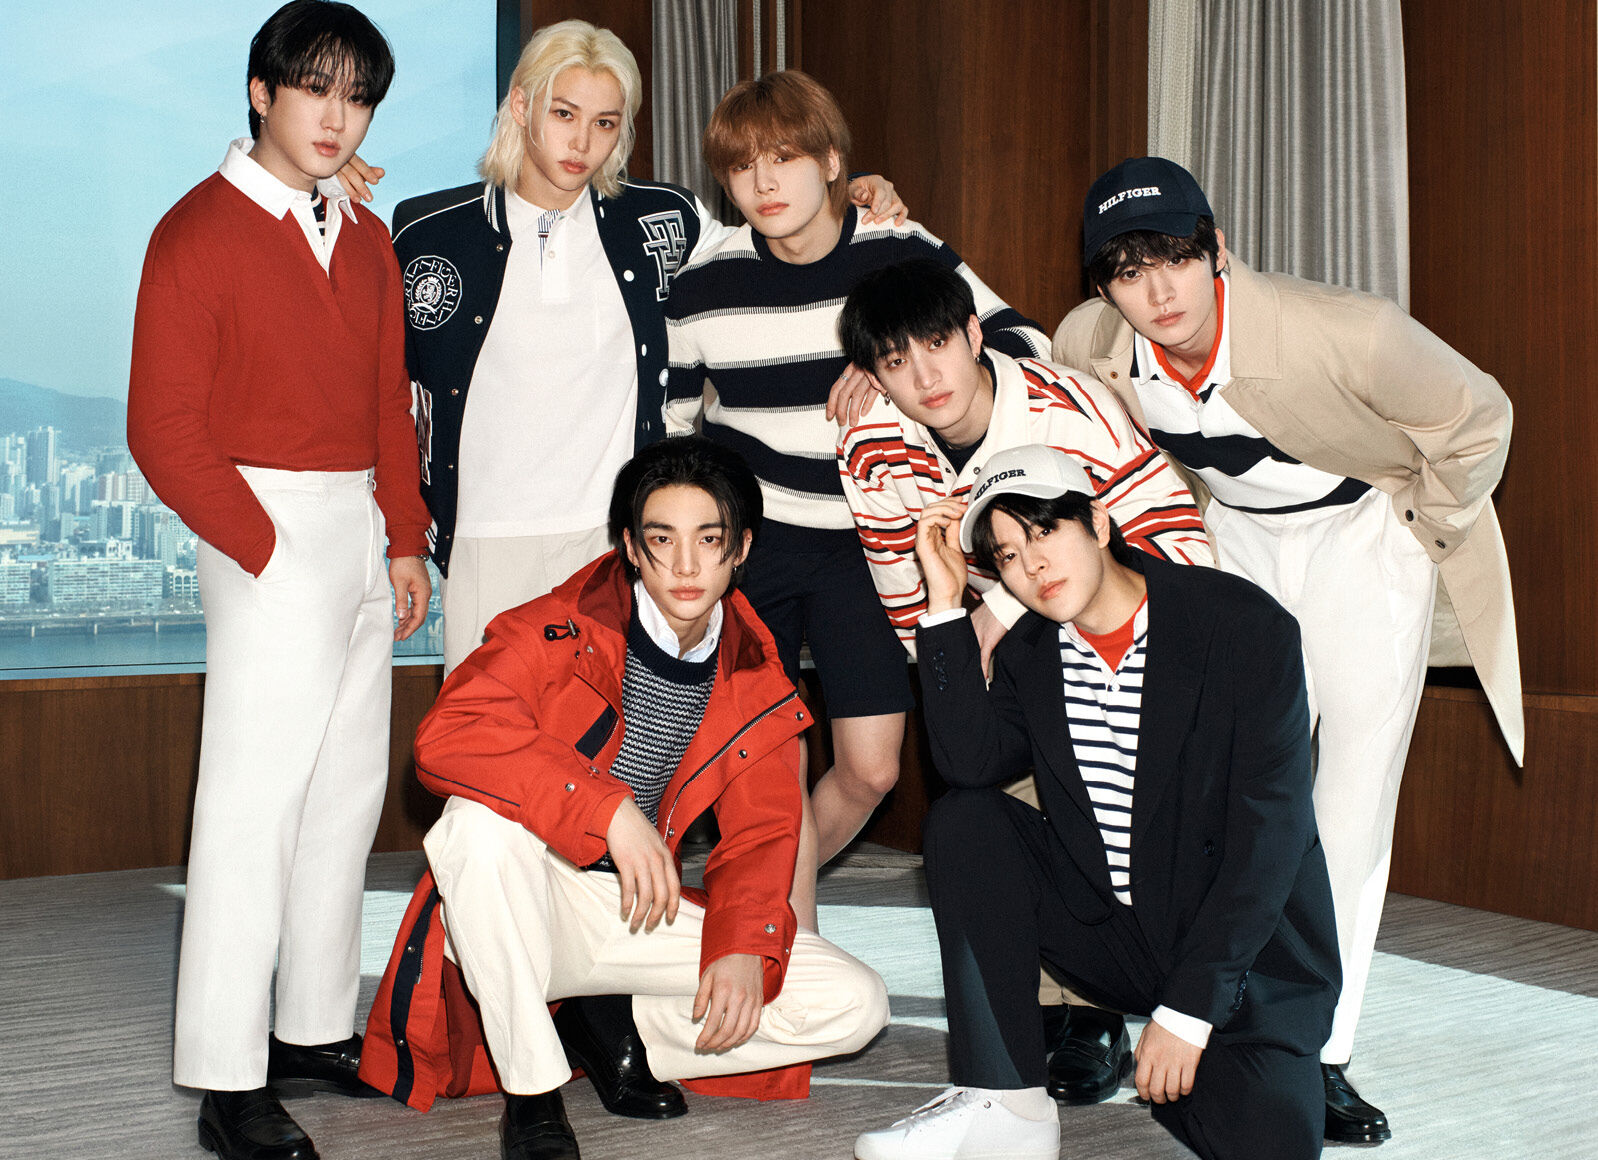 Tommy Hilfiger featuring Stray Kids in modern classics.